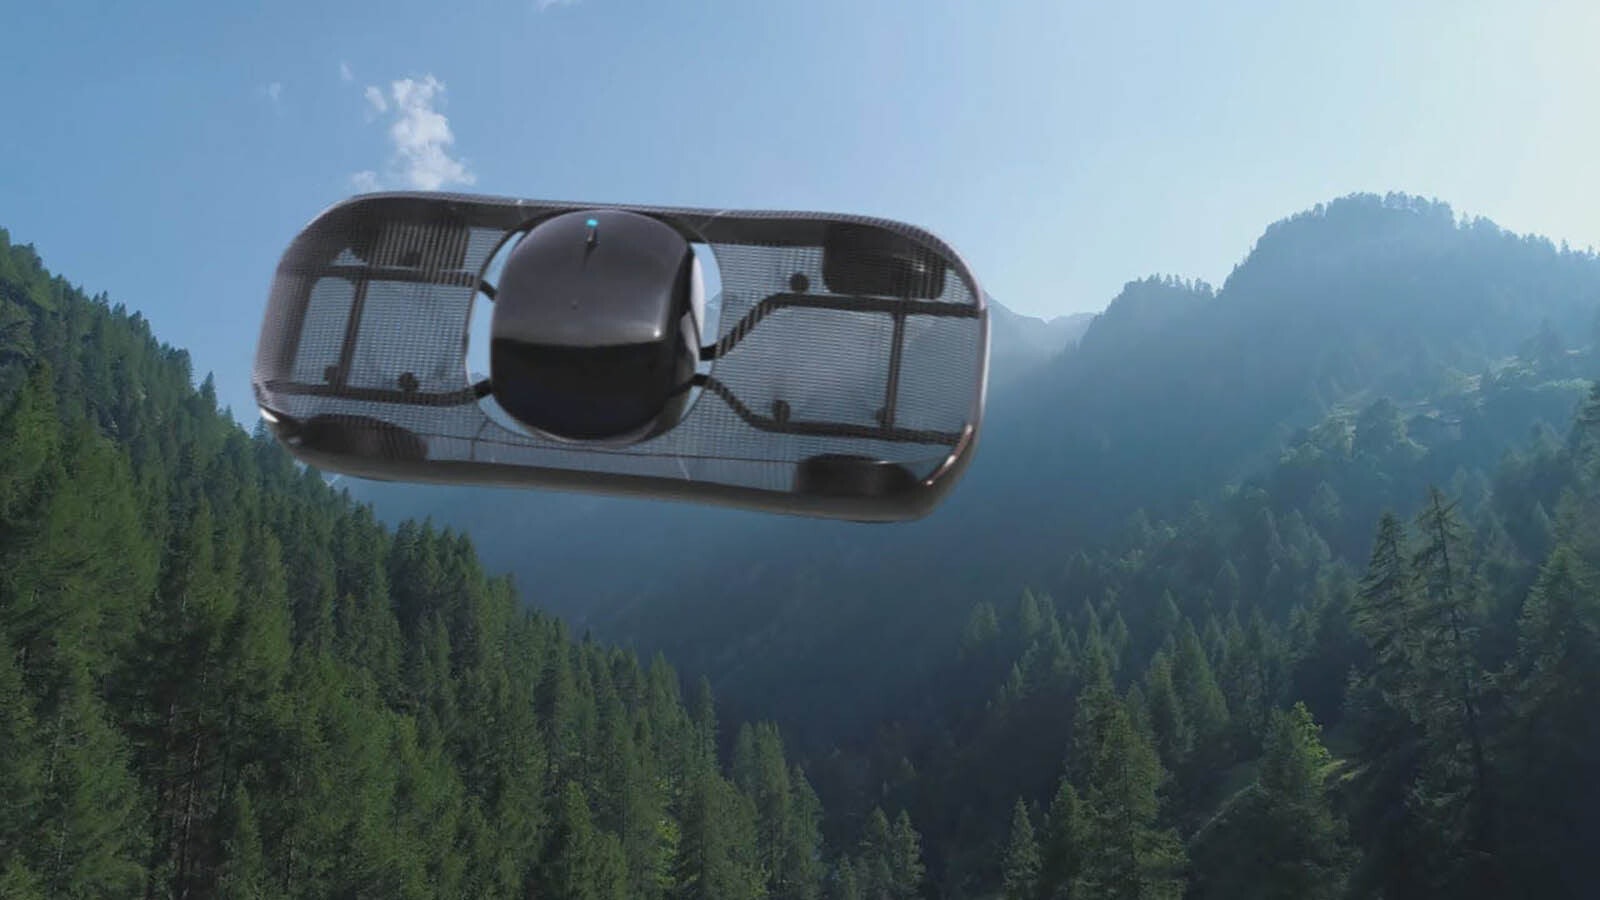 California-based Alex Aeronautics is compiling a waiting list for its electric flying vehicle.